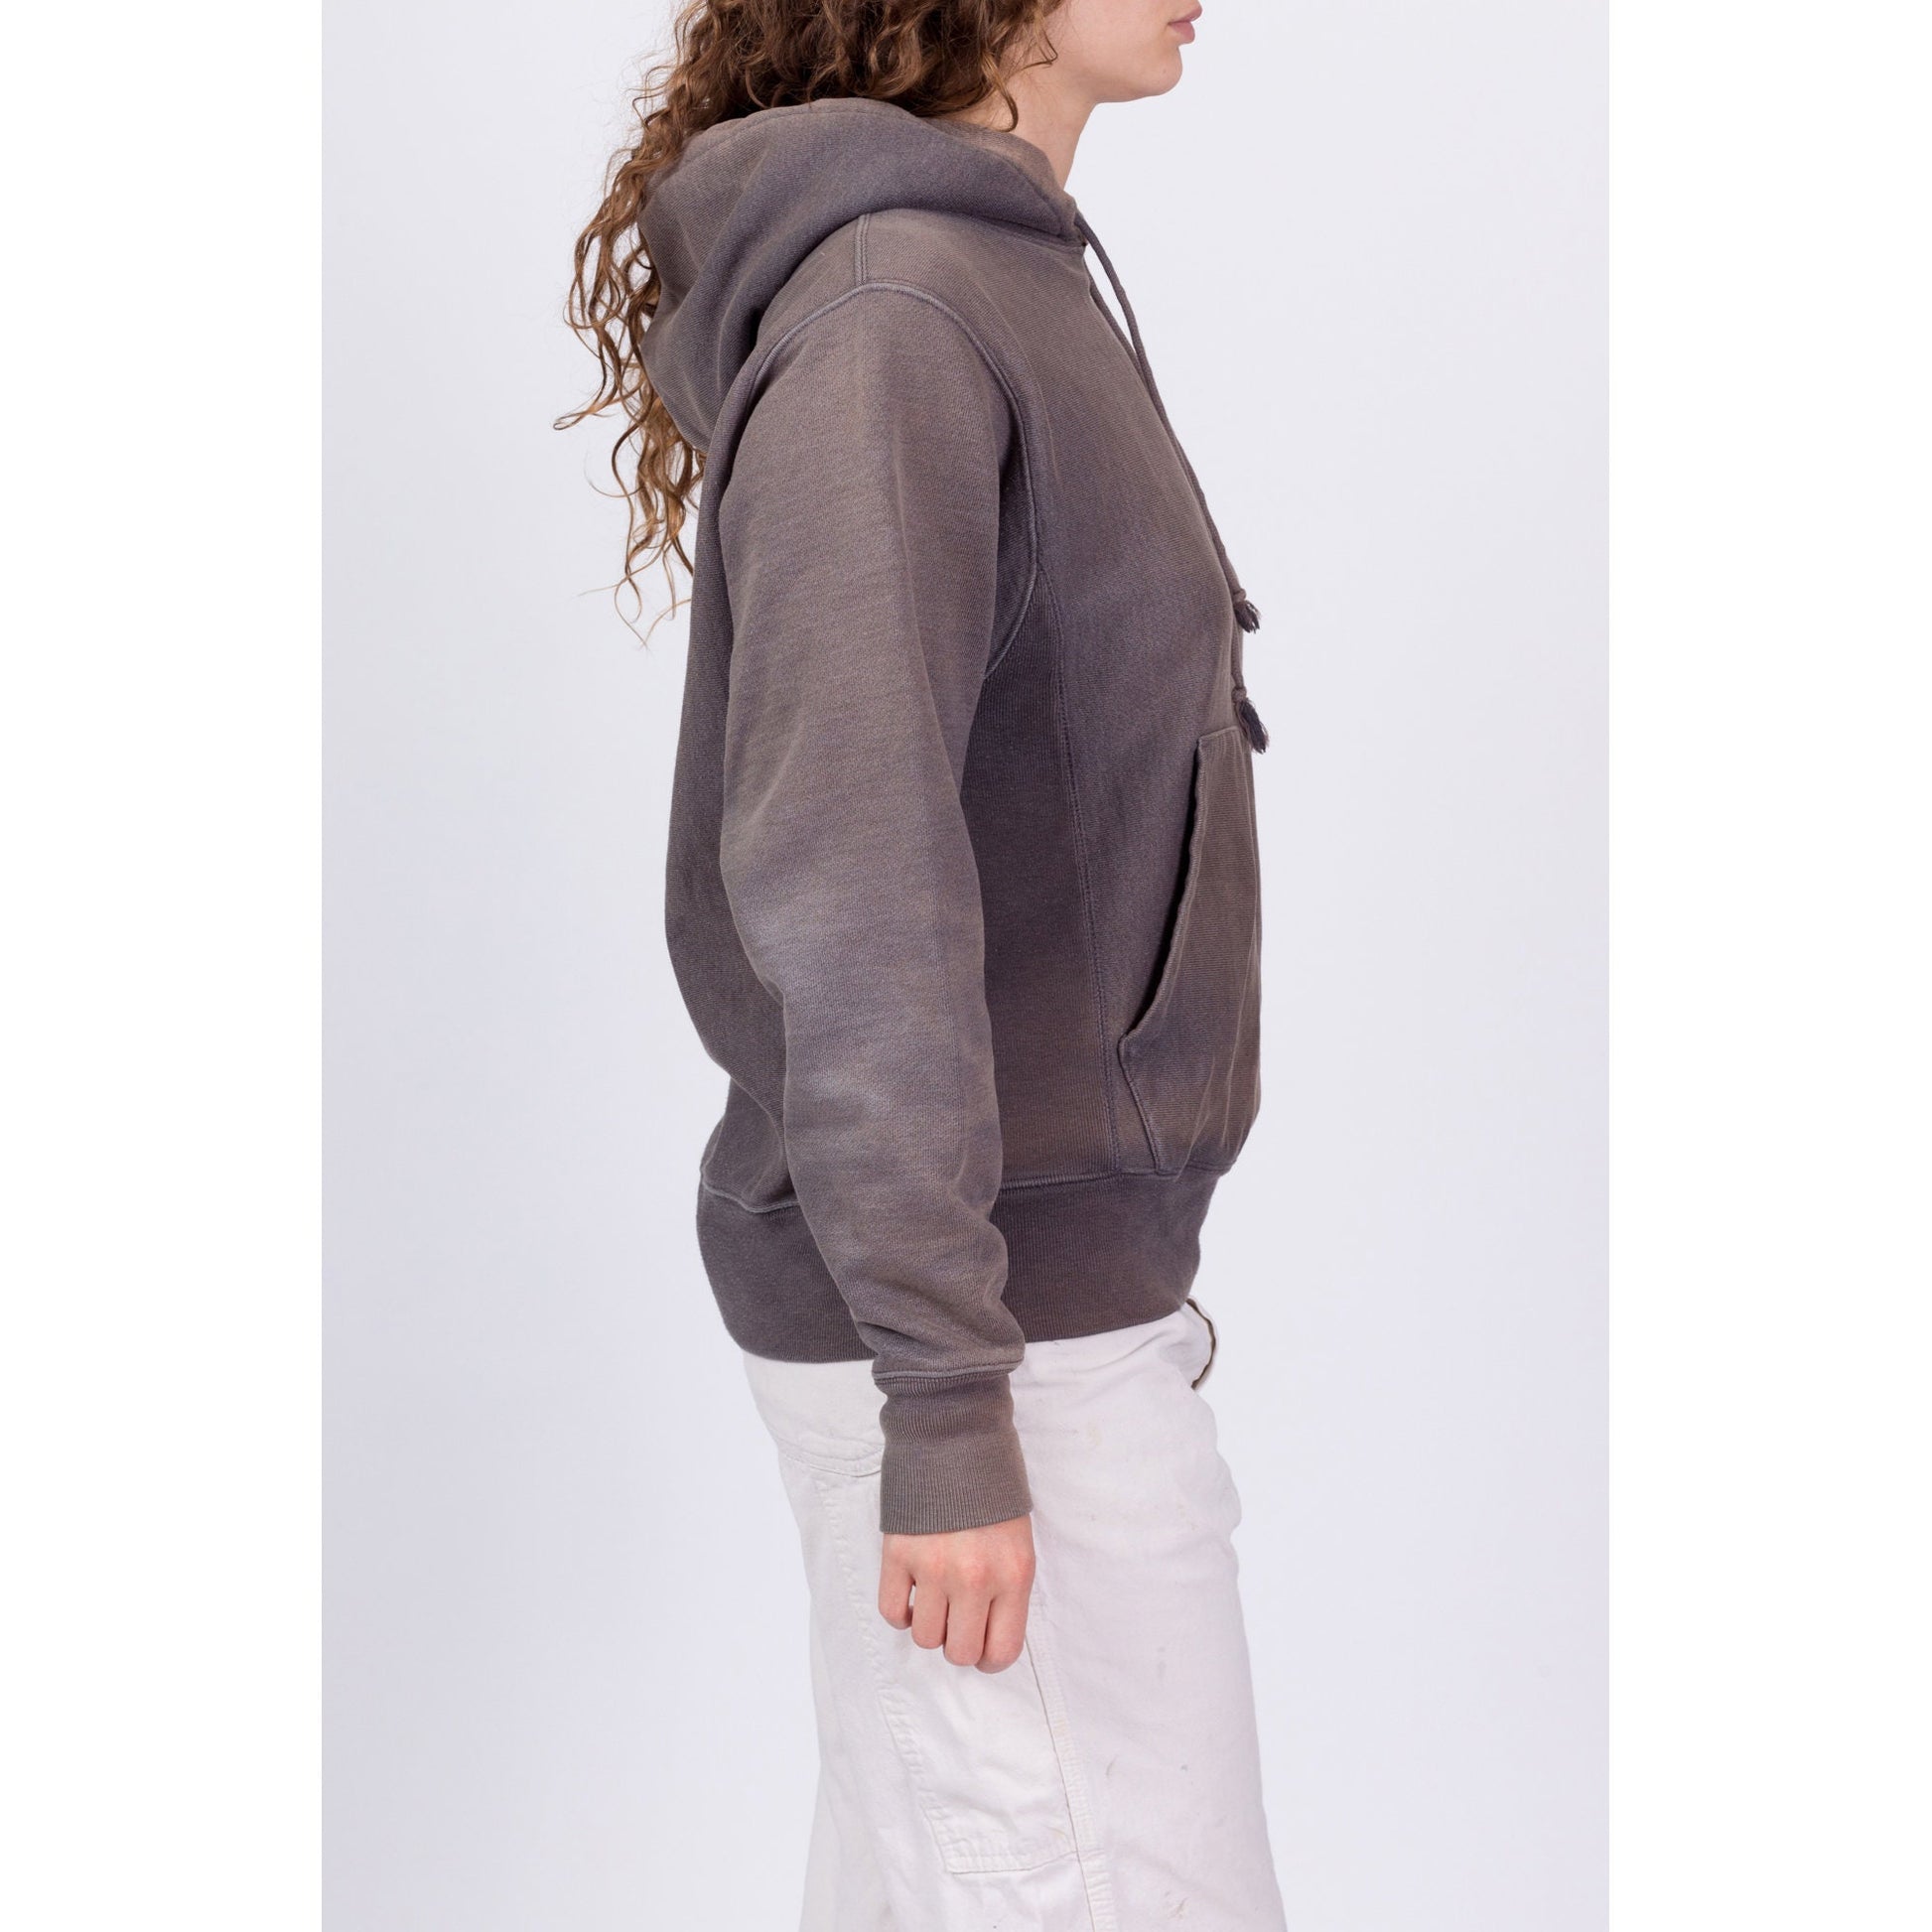 Champion Reverse Weave Faded Hoodie - Unisex Small 